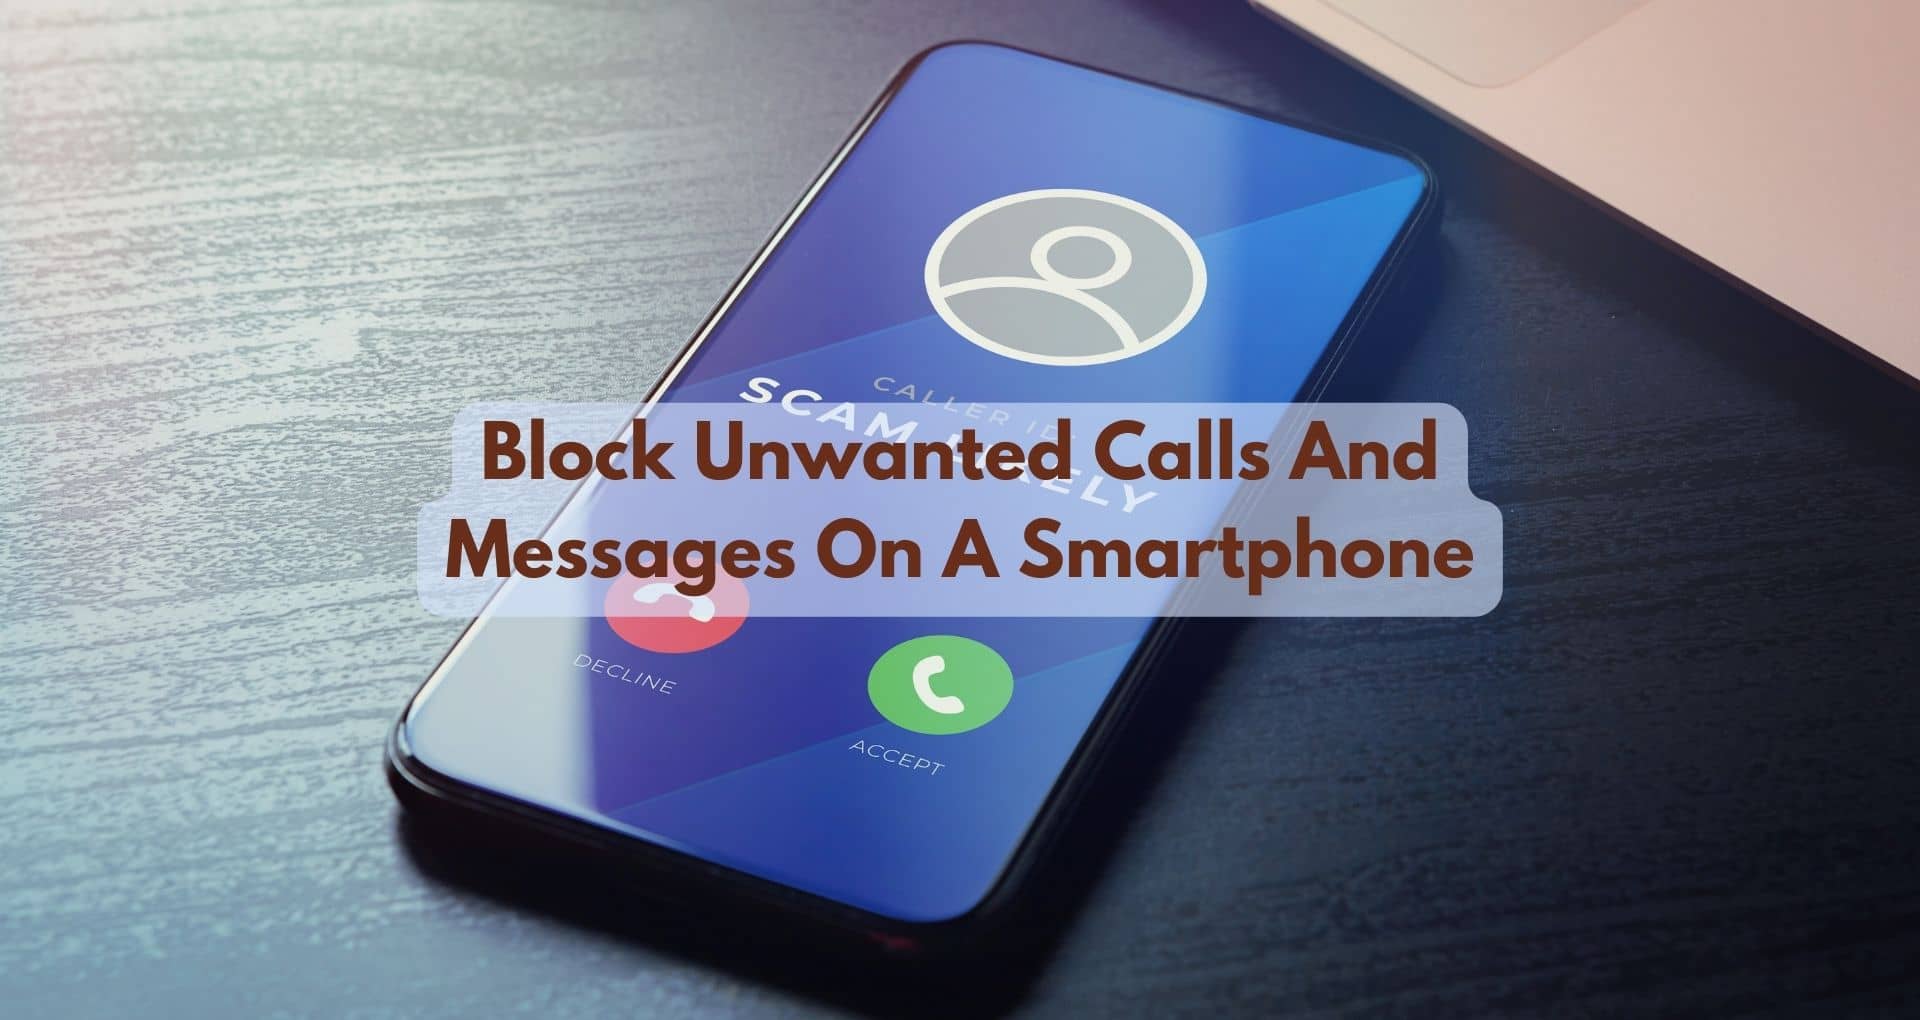 How To Block Unwanted Calls And Messages On A Smartphone?